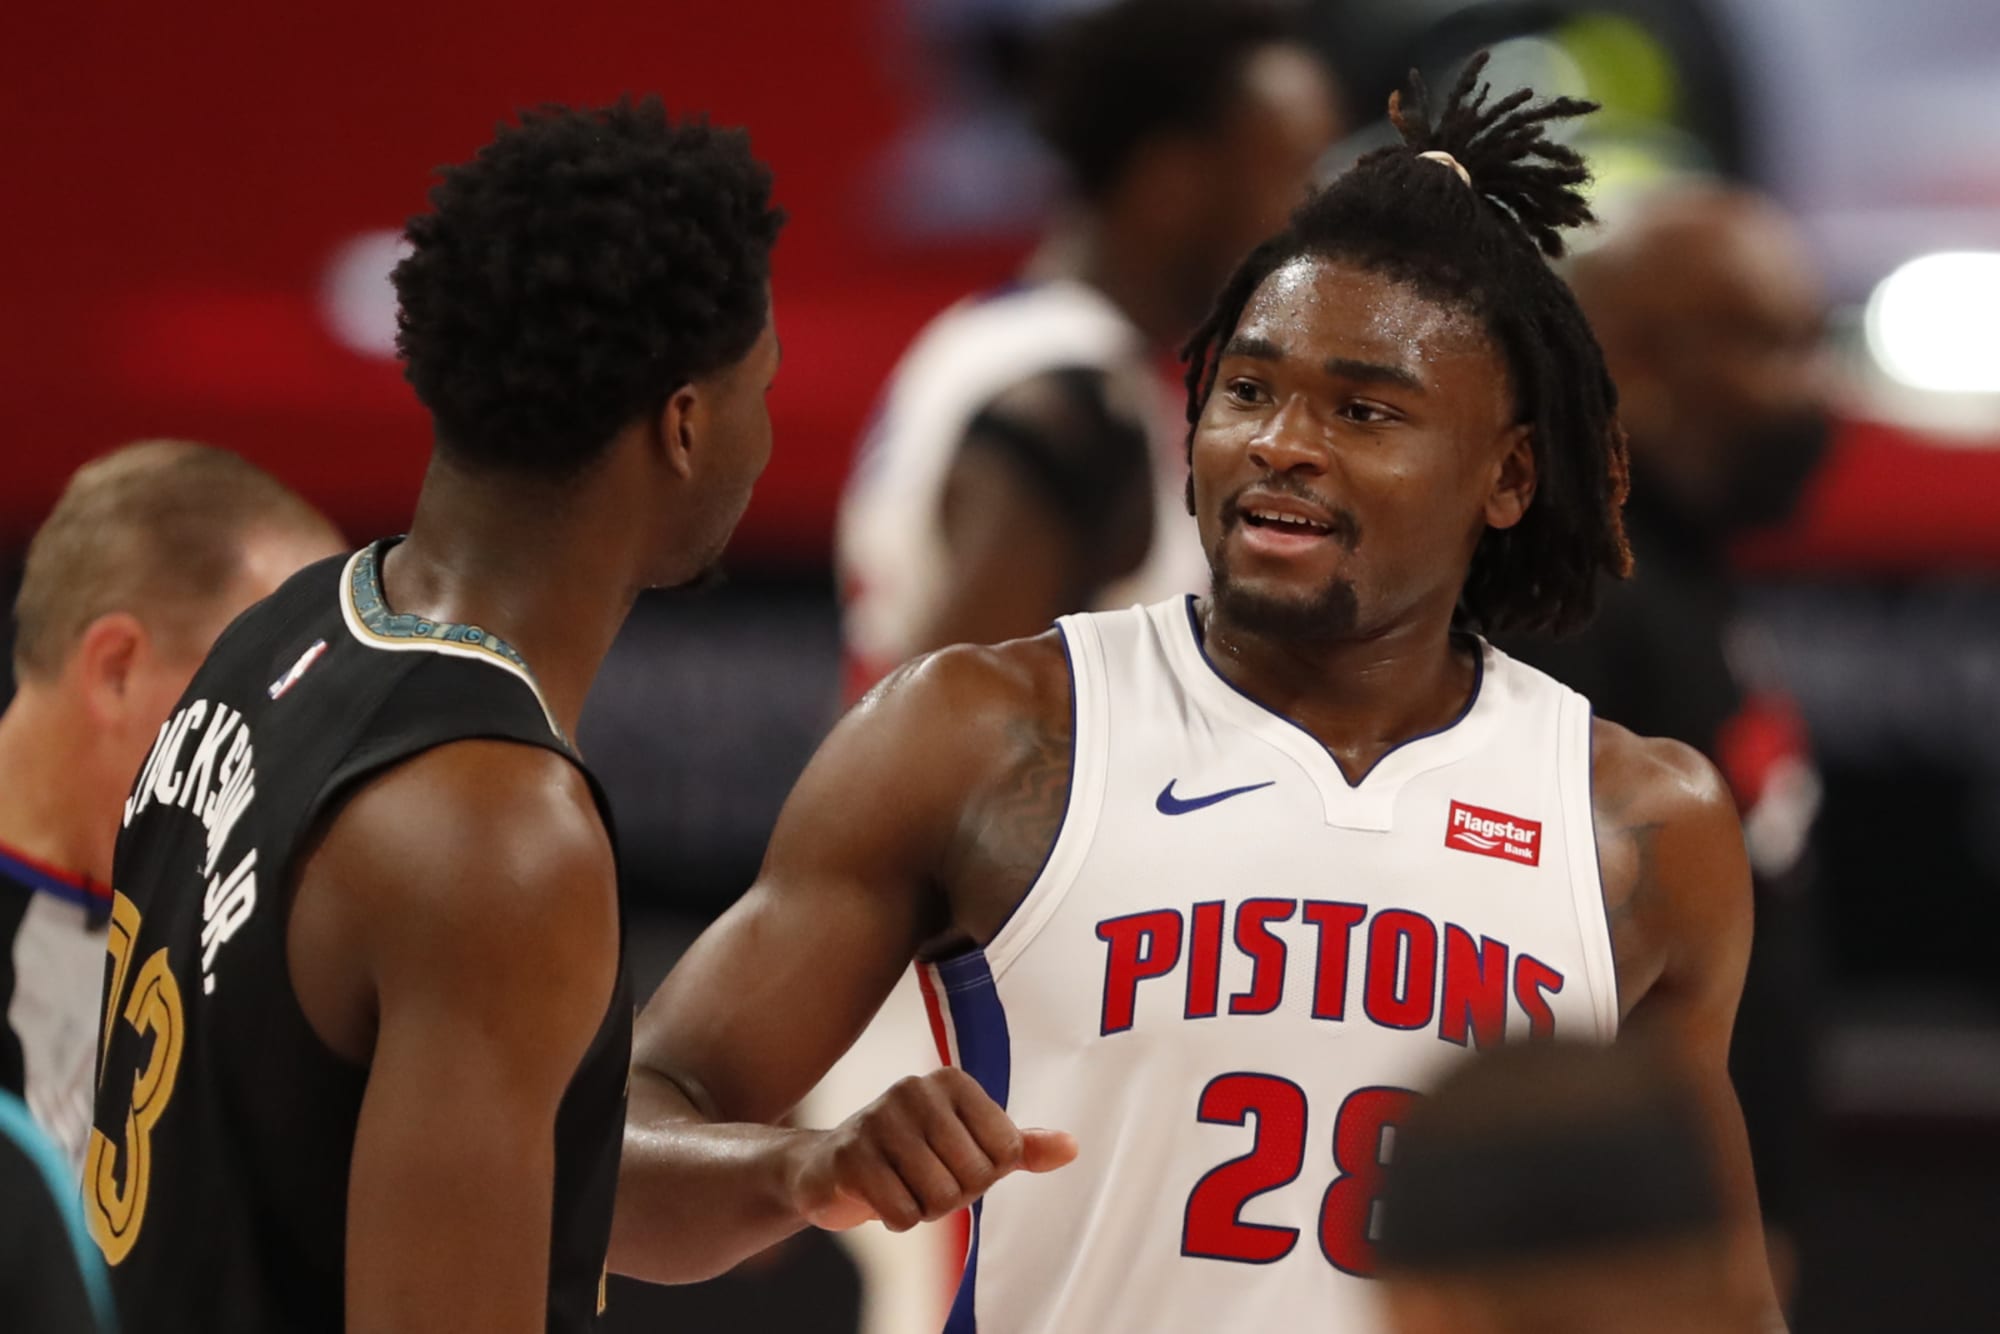 Locked on Pistons: Isaiah Stewart continues to show massive improvement in  the midst of Detroit Pistons team struggles